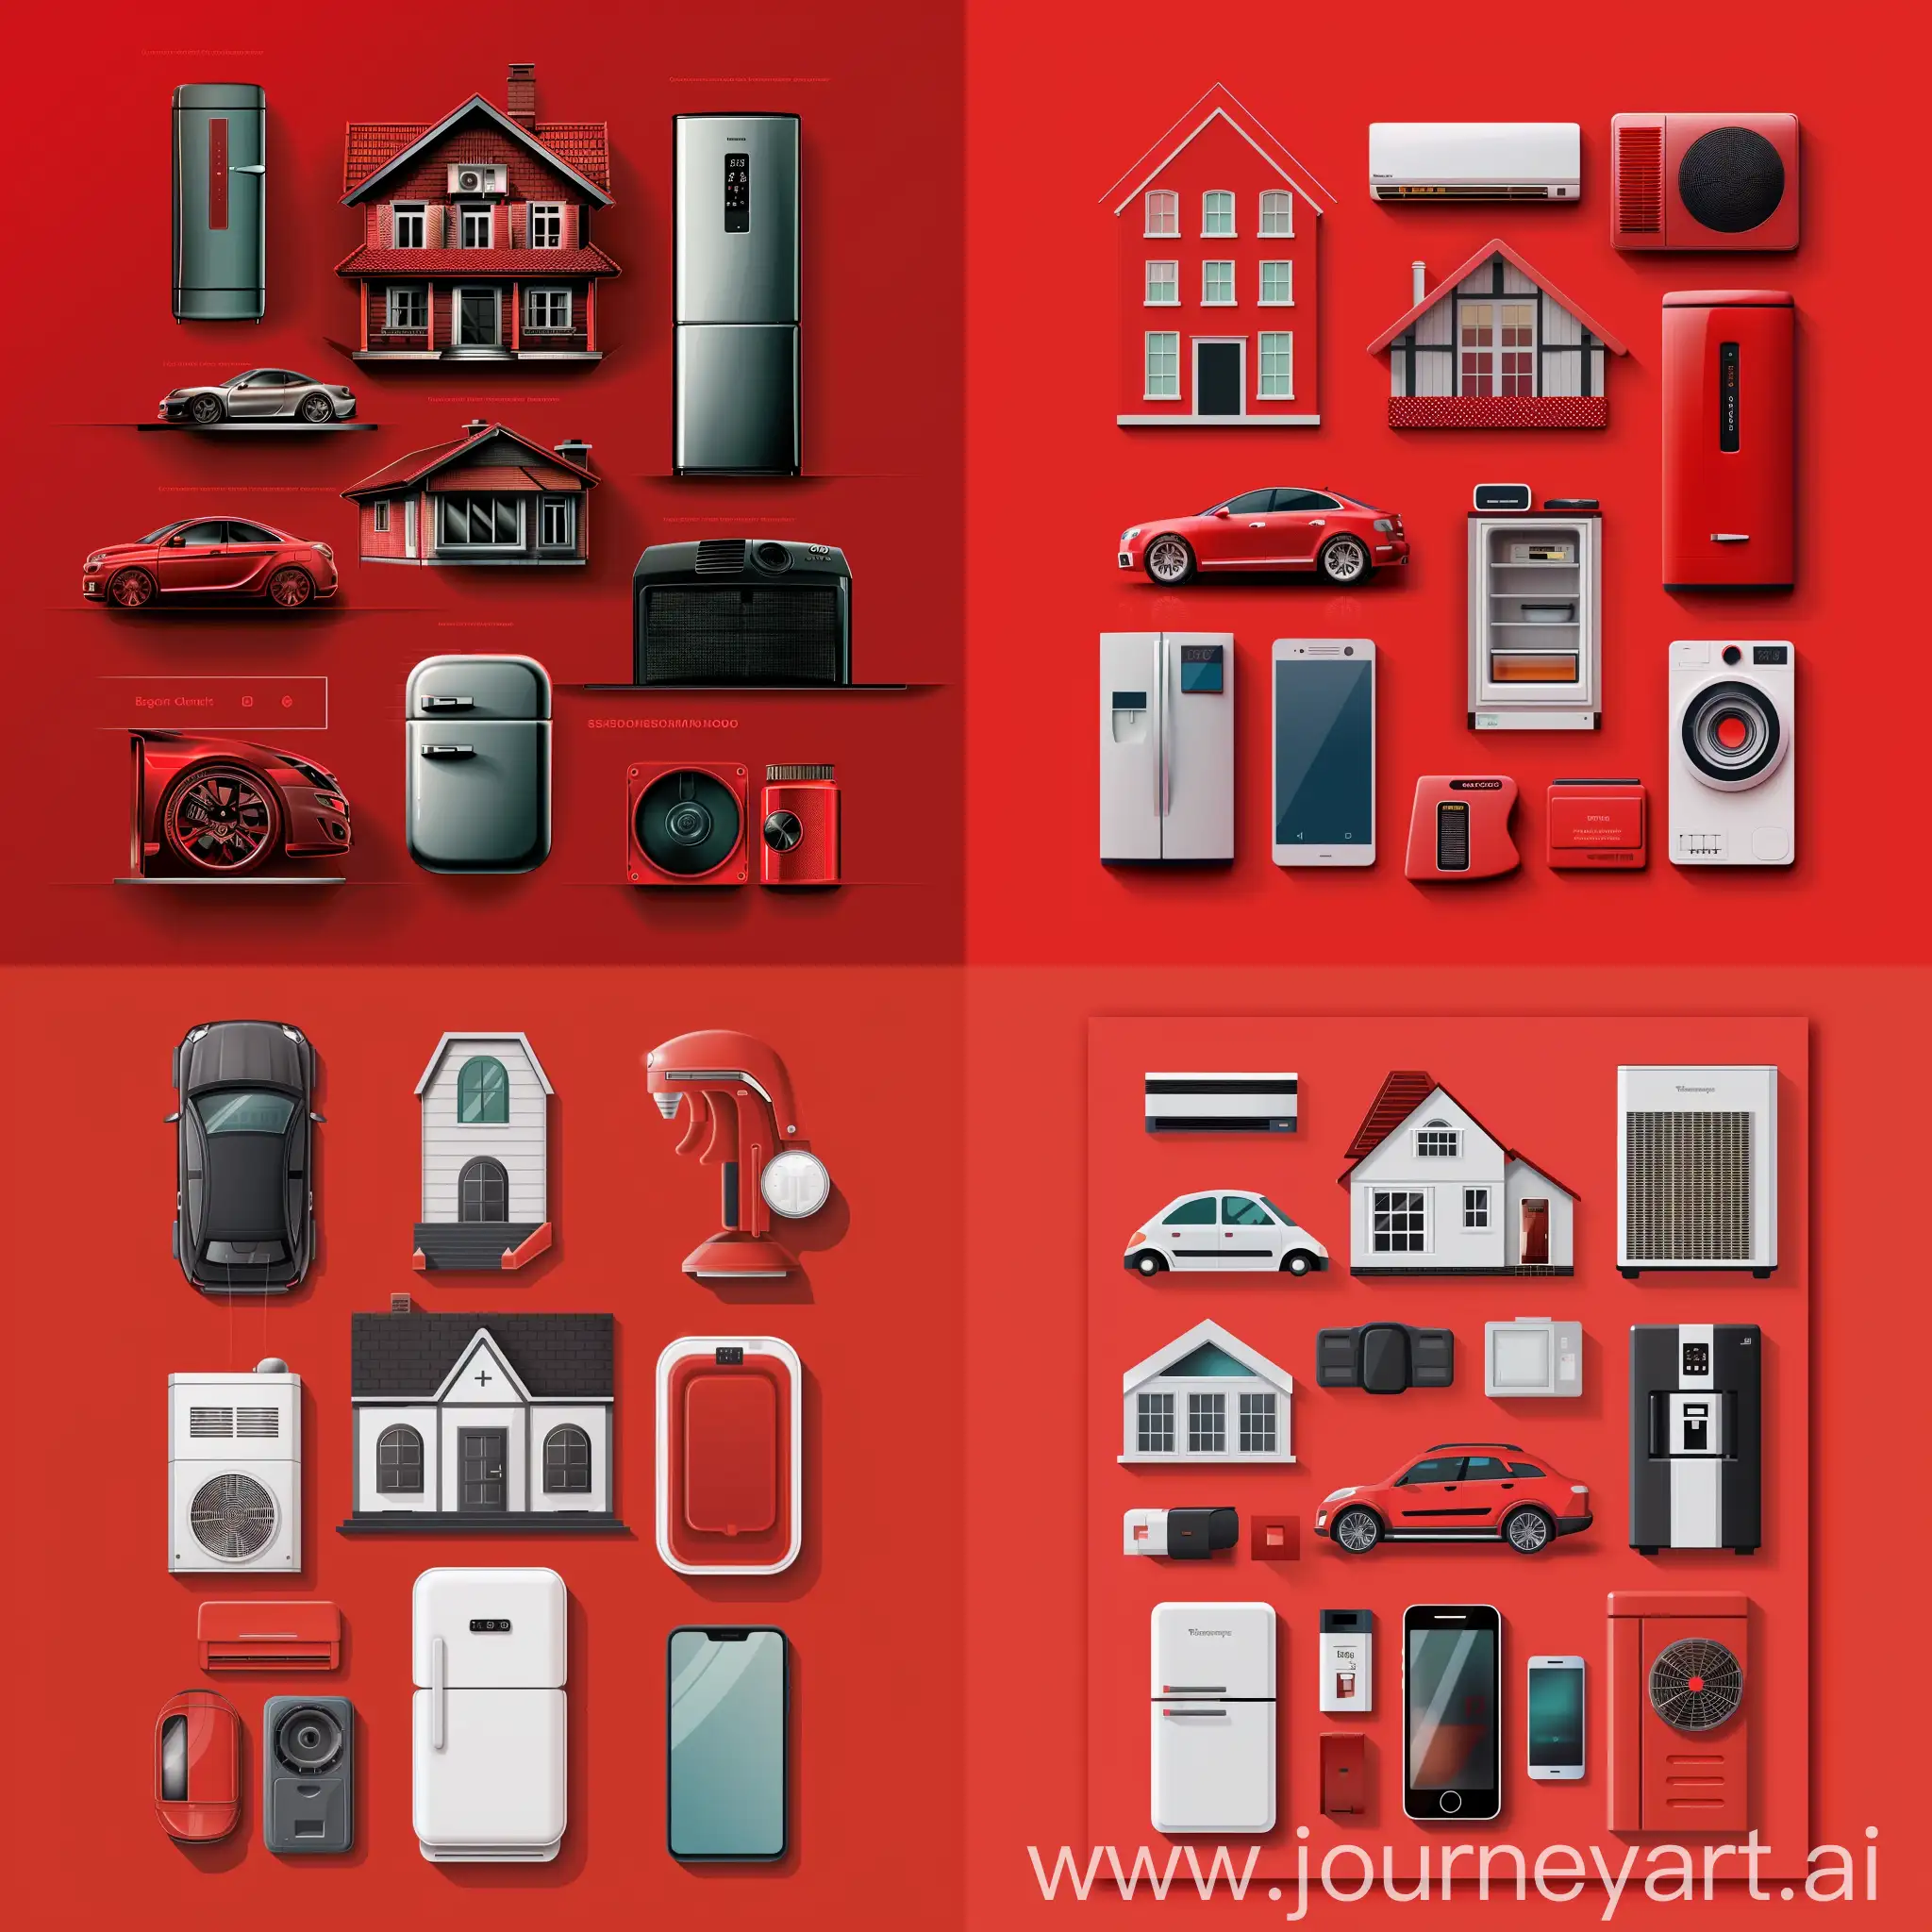 Dynamic-Avatar-Design-for-Online-Market-Promotion-Essential-Home-Appliances-Collage-on-Red-Background